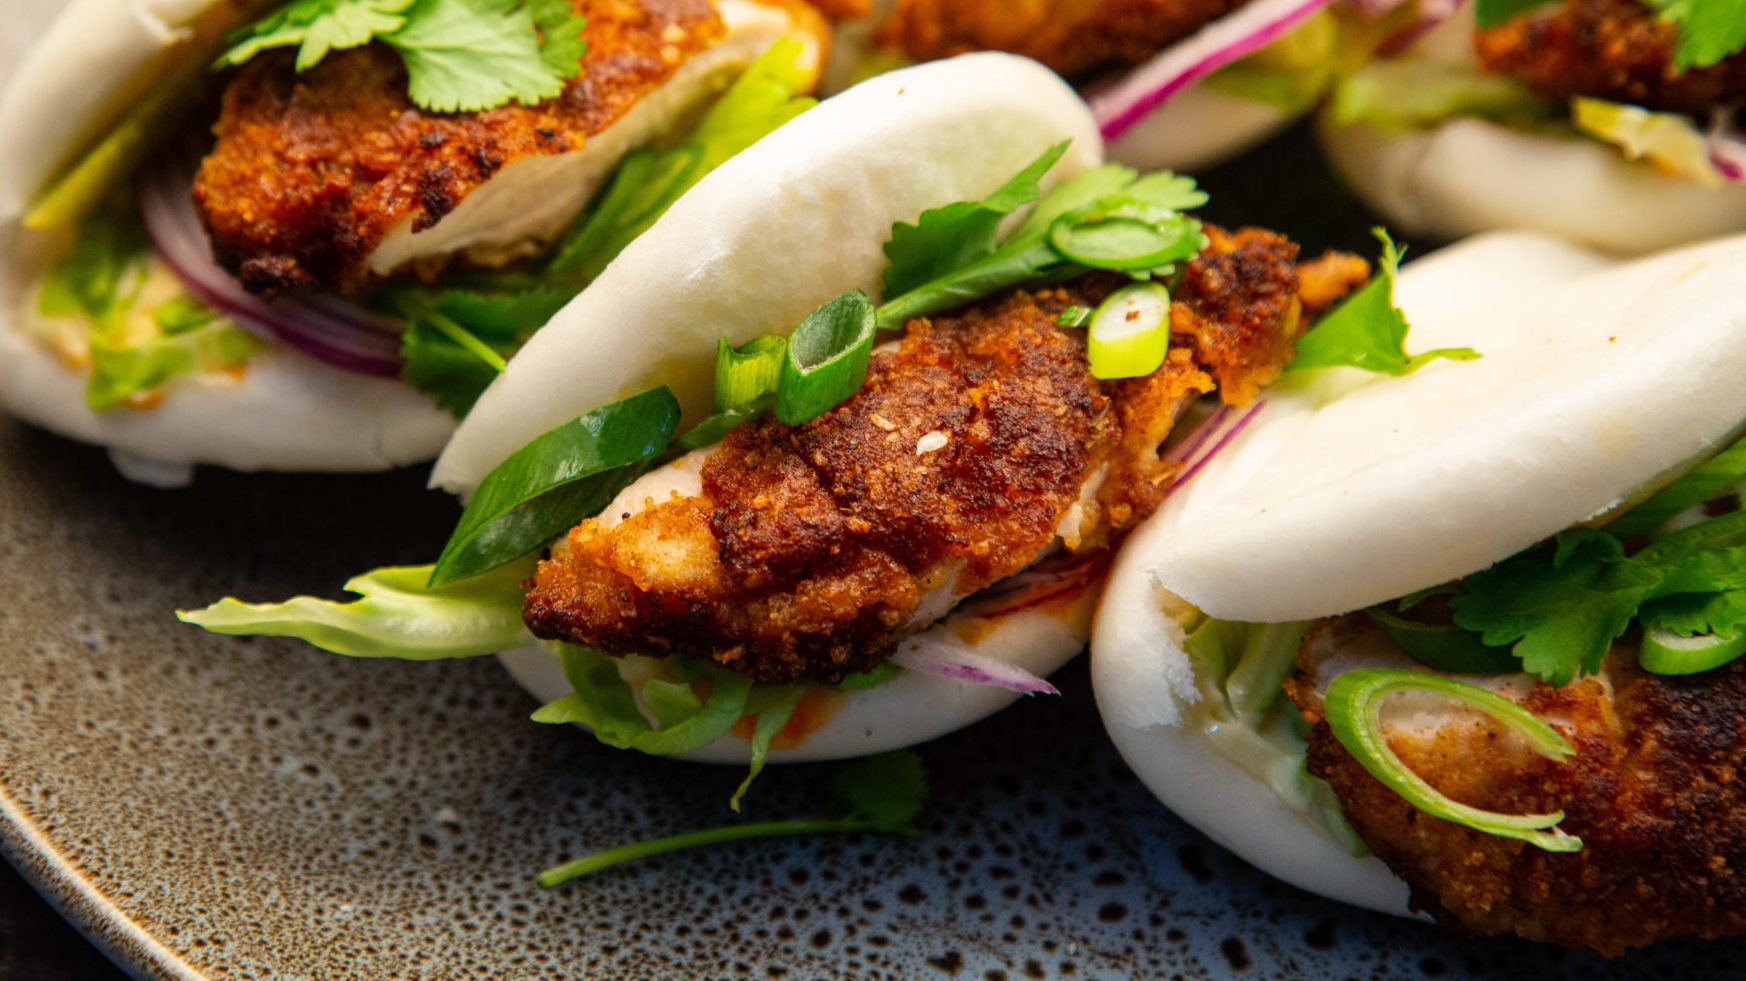 Three fried chicken and salad filled bao buns on a tray